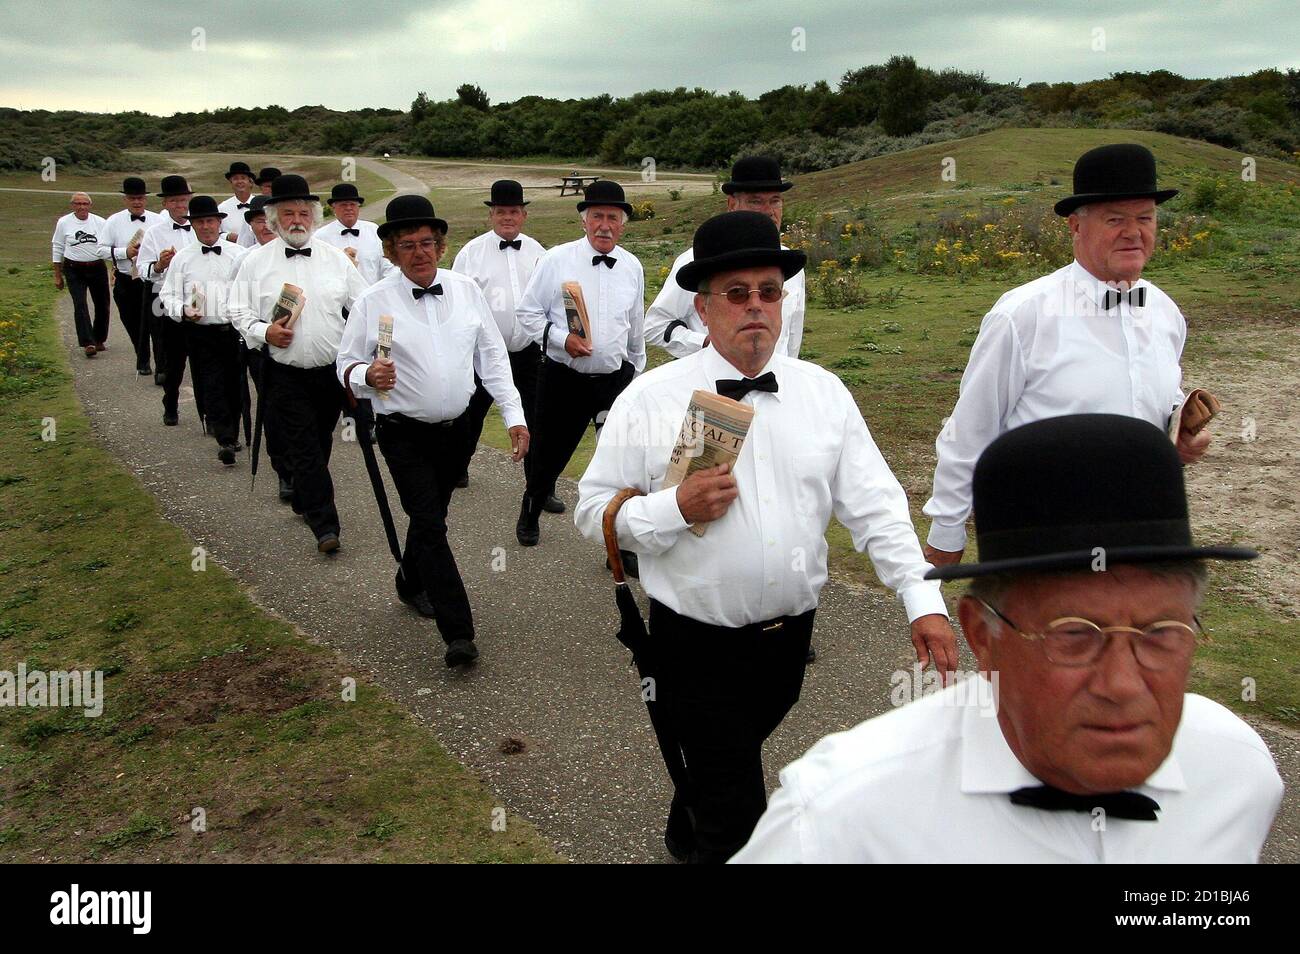 Members of a men's walking club known as 'The Lords', walk through the dunes of the beach resort of Hoek van Holland in western Holland August 11, 2005. Dressed in traditional British outfits, 'The Lords' participated in an annual walking competition, 'The Avond vierdaagse', over four evenings with a daily walk of 10 kilometres (6 miles). Picture taken August 11, 2005. REUTERS/Jerry Lampen  JFL/PN Stock Photo